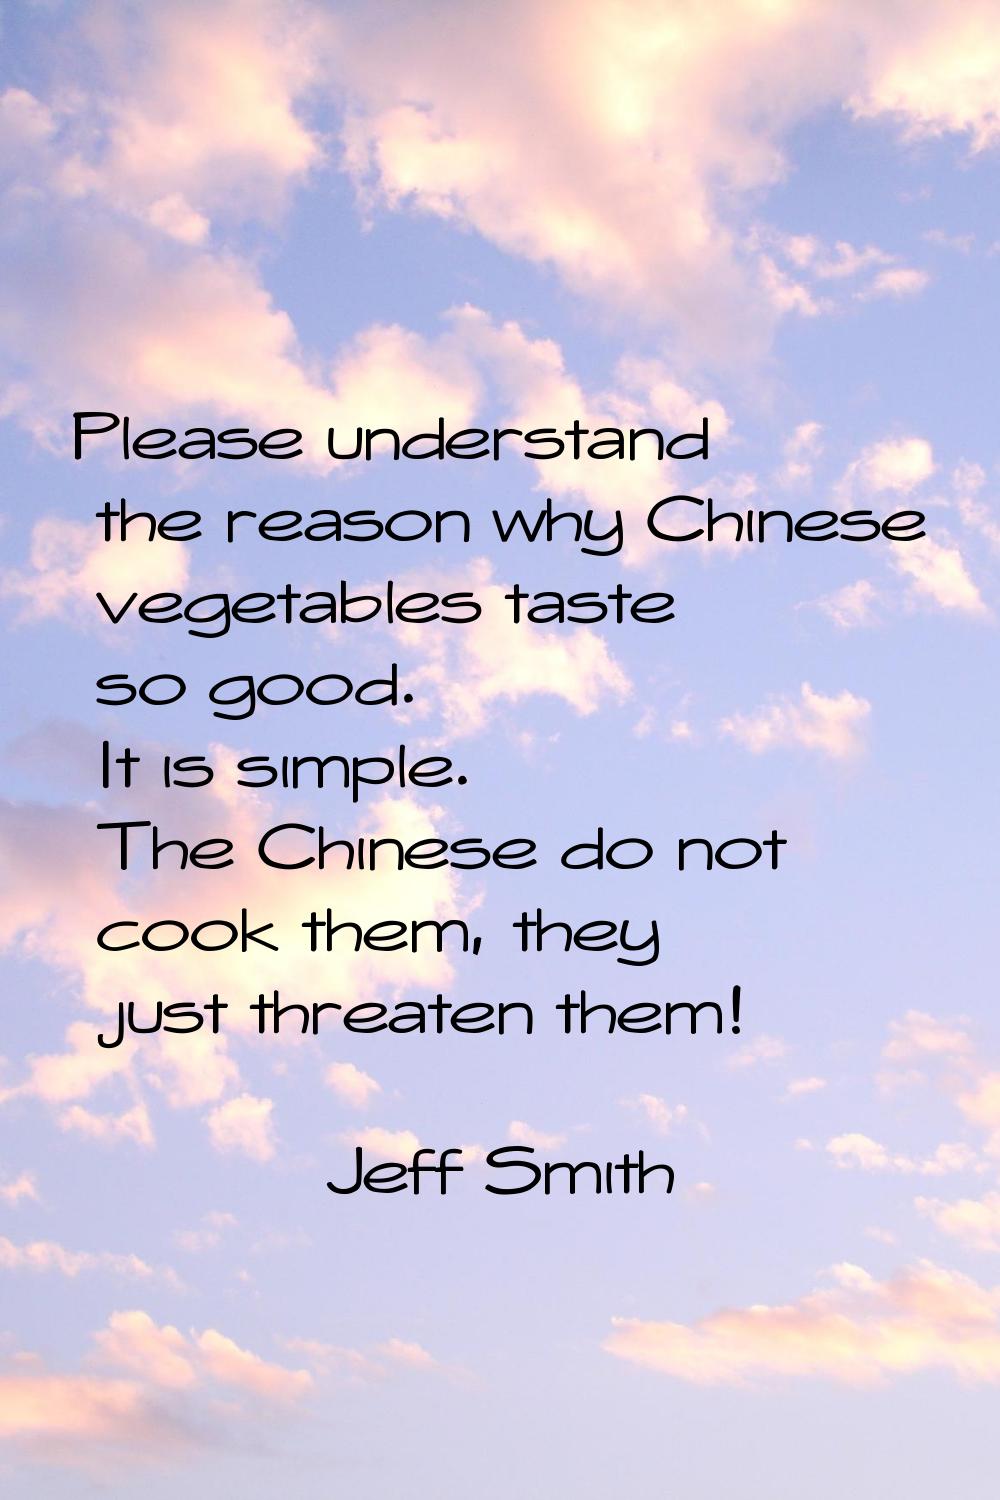 Please understand the reason why Chinese vegetables taste so good. It is simple. The Chinese do not